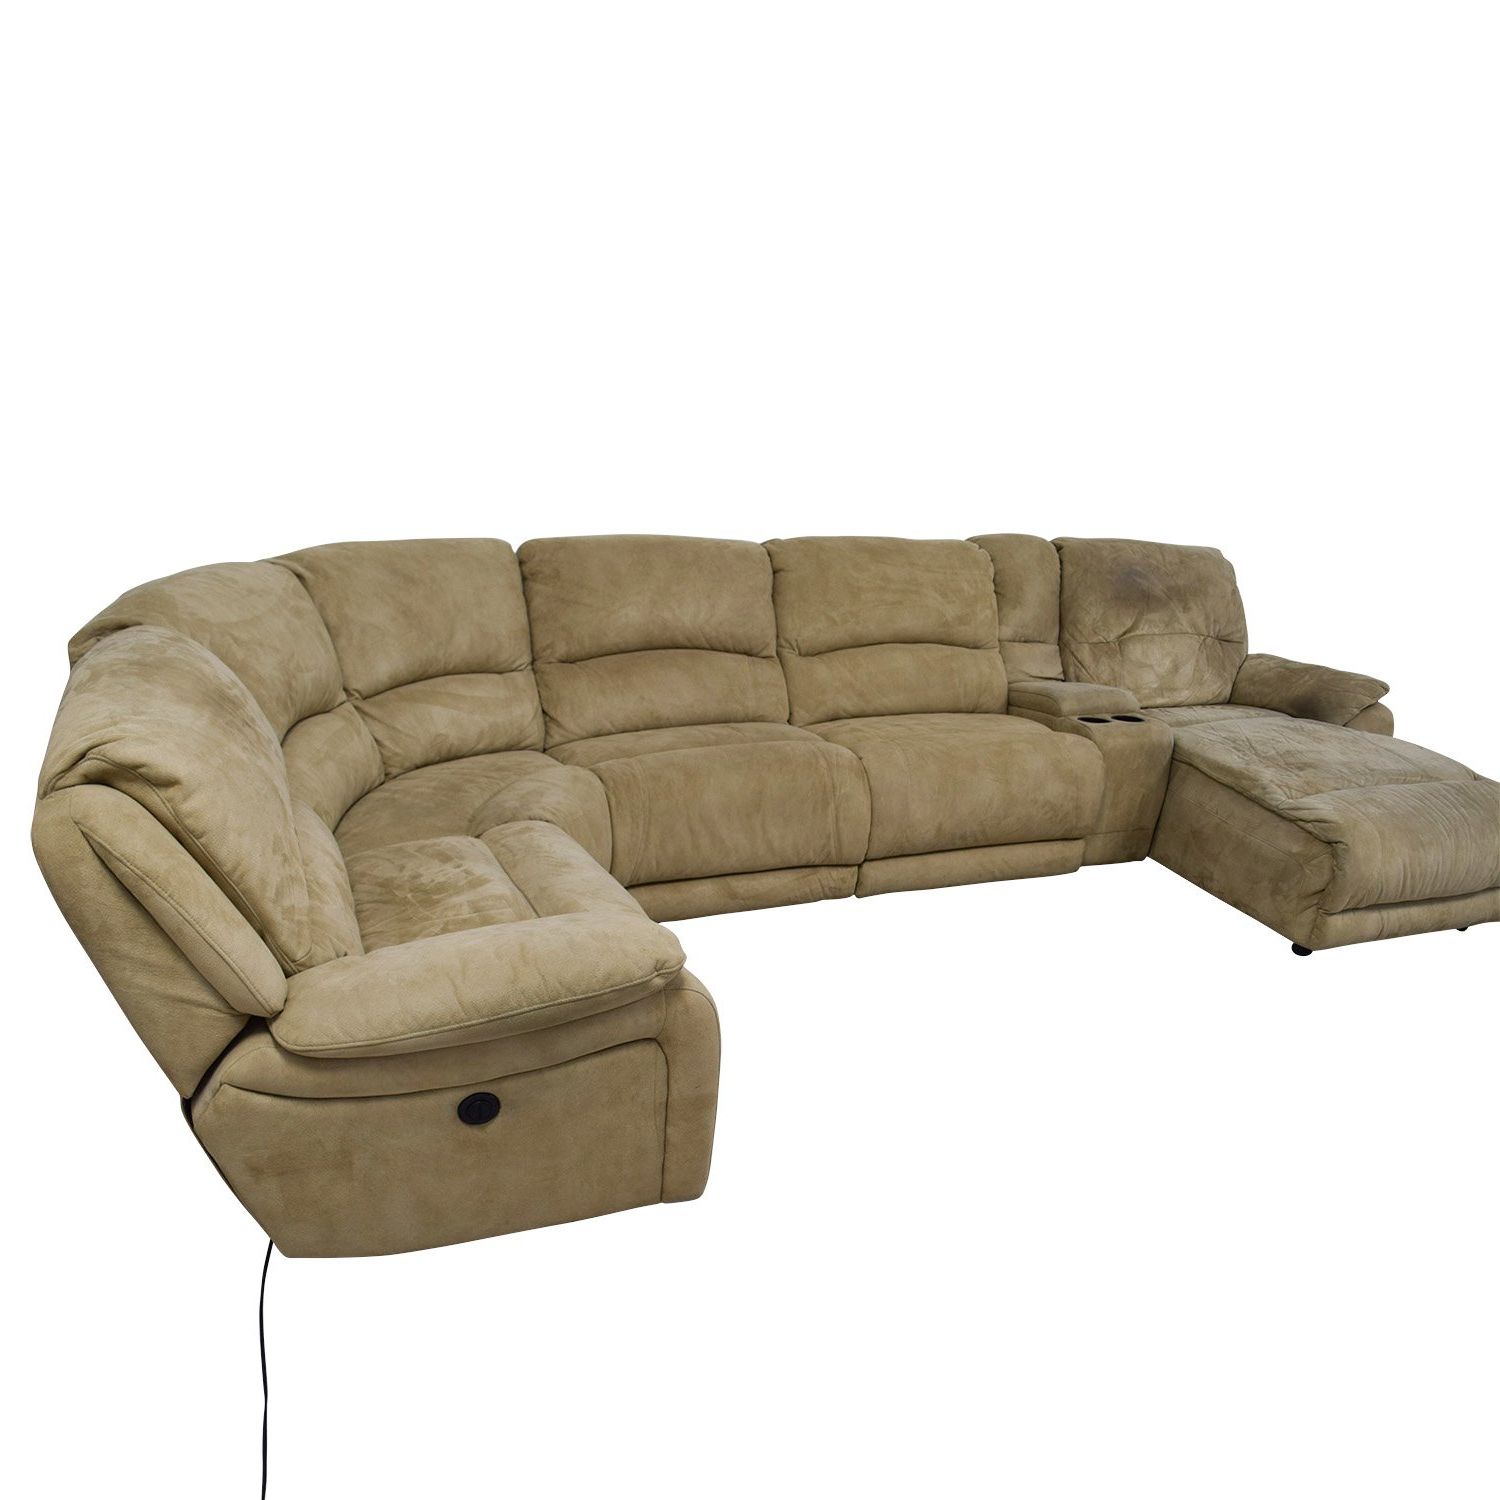 Fabulous 25 Power Reclining Sectional Sofa Favorite Regarding Most Recently Released Calder Grey 6 Piece Manual Reclining Sectionals (Gallery 3 of 20)